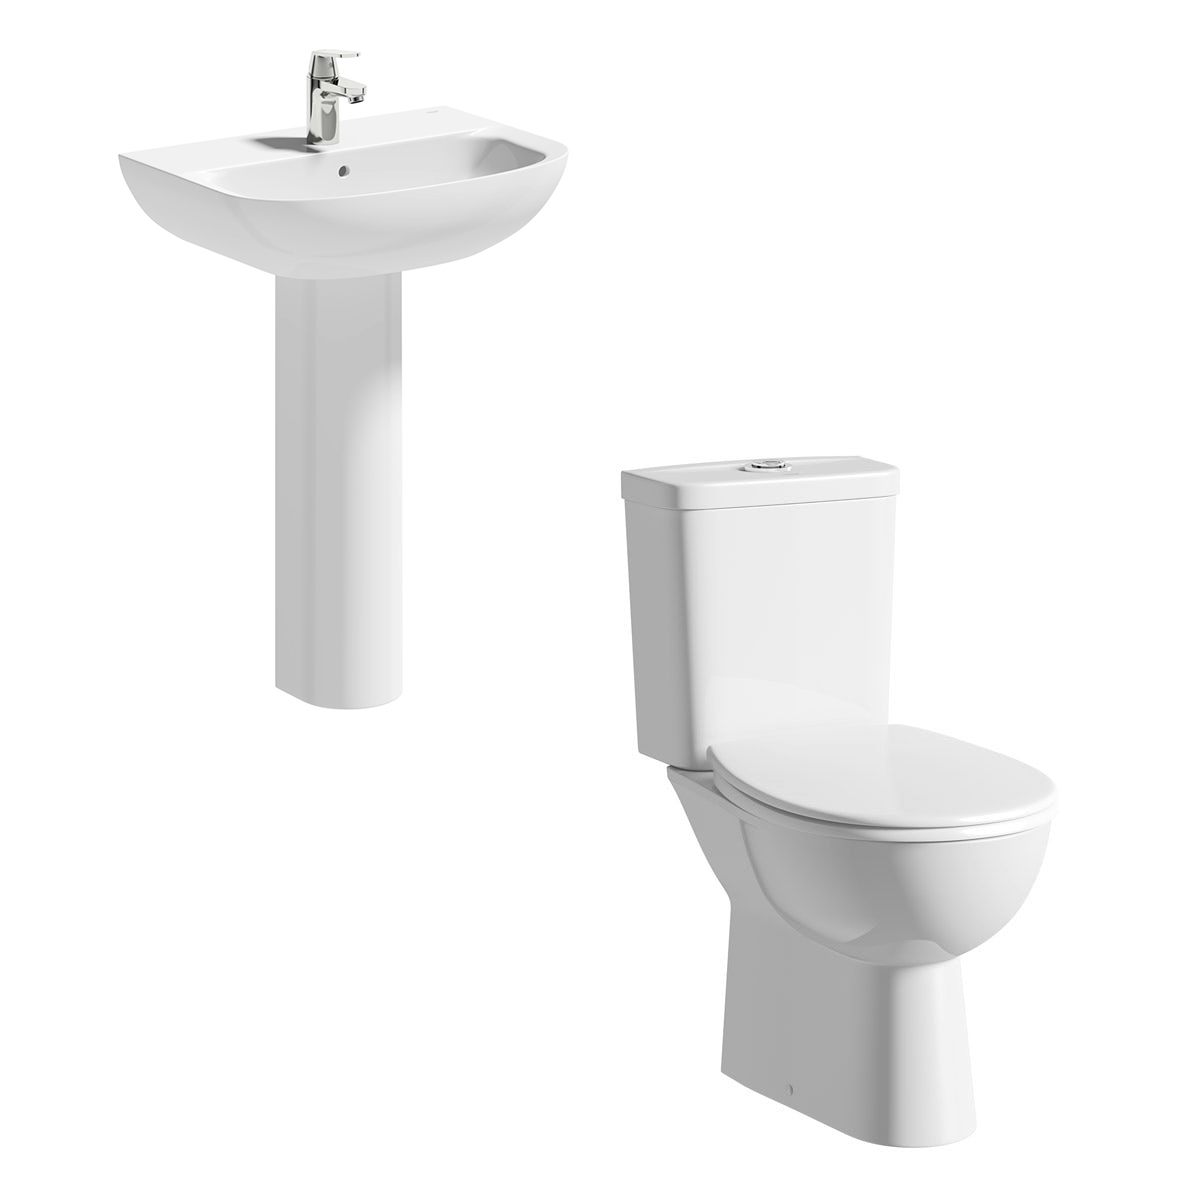 Grohe Bau rimless cloakroom suite with full pedestal basin 600mm